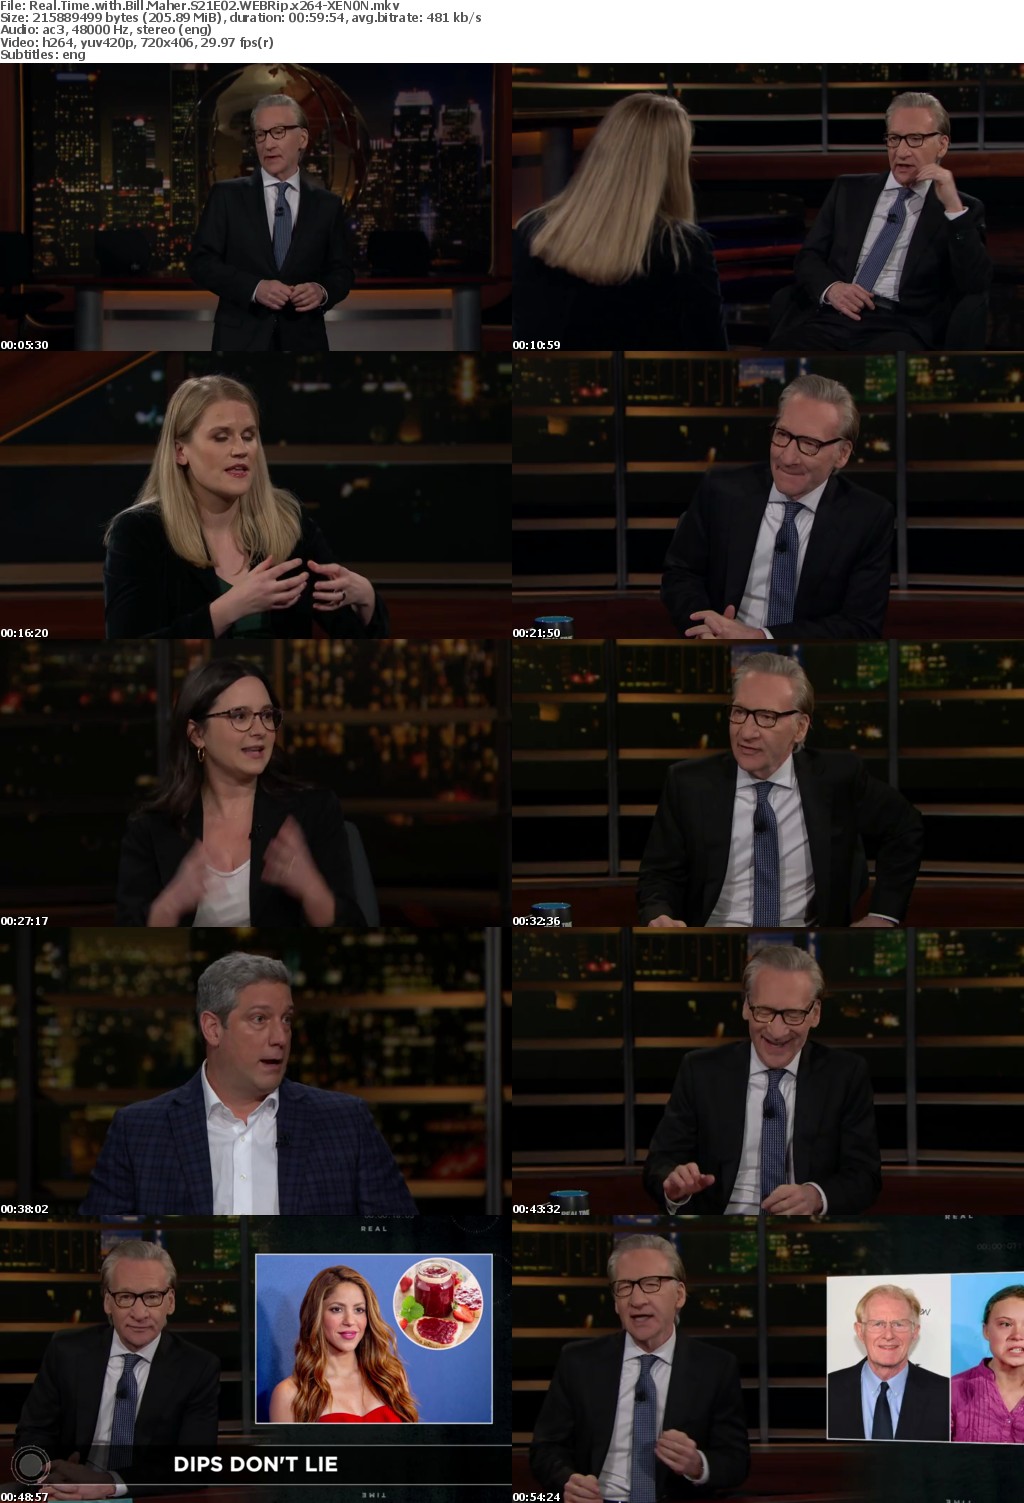 Real Time with Bill Maher S21E02 WEBRip x264-XEN0N